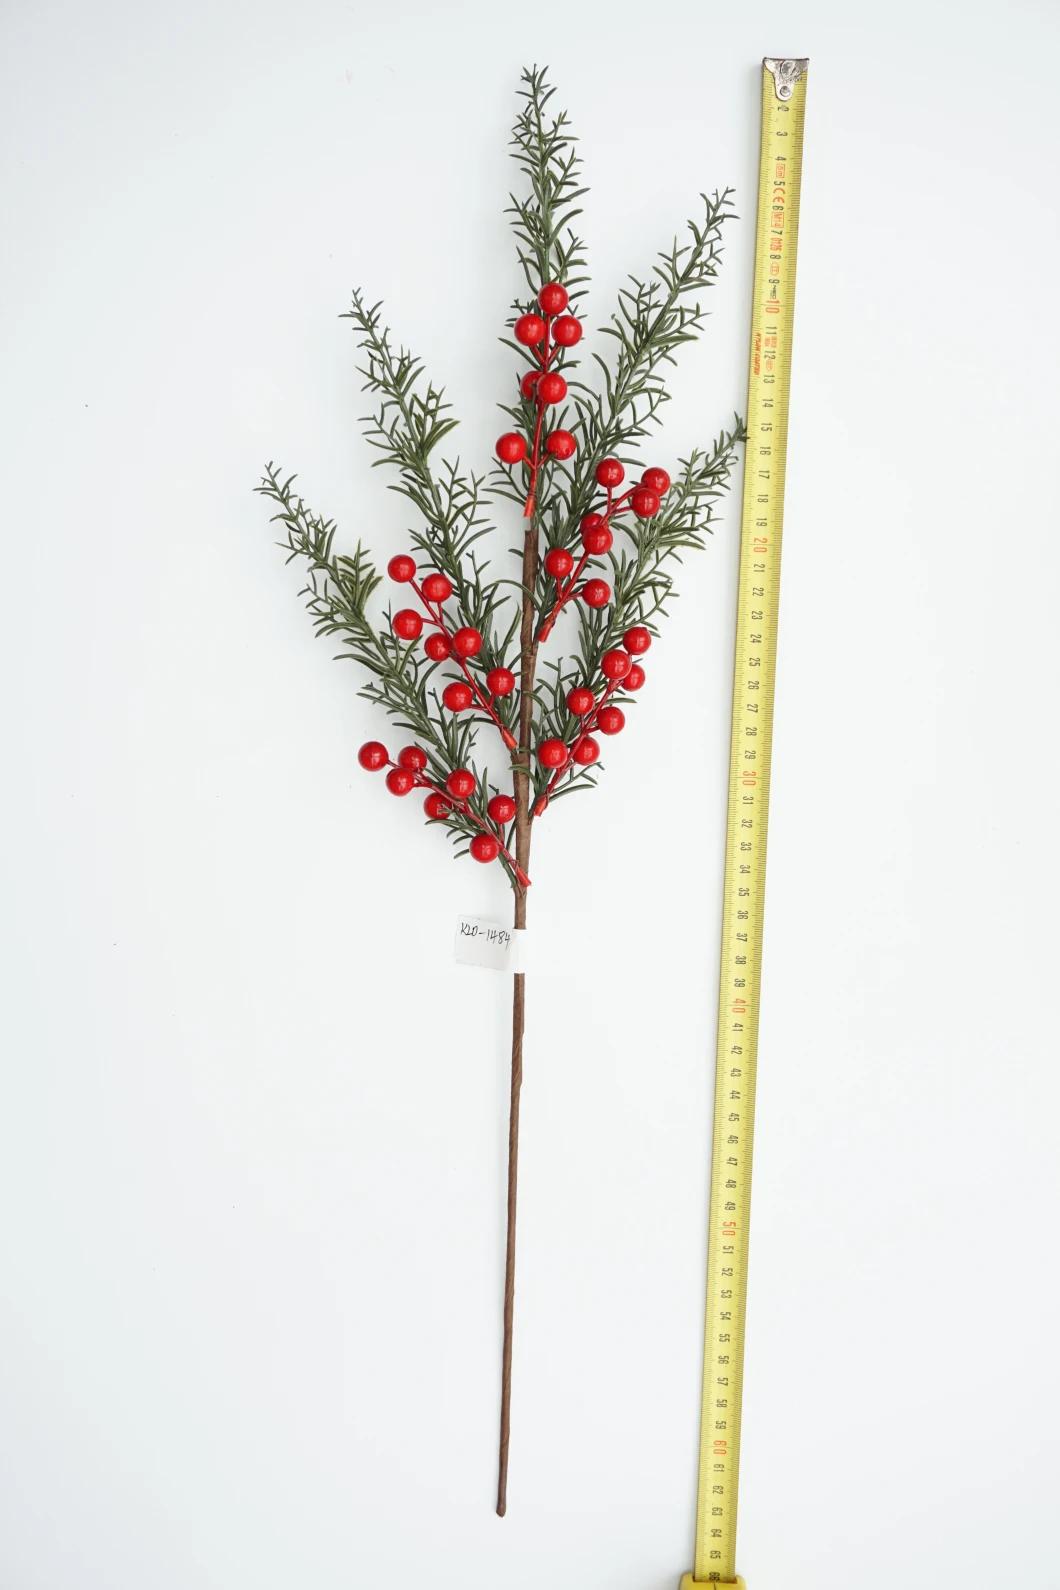 Red Christmas Berry Blossom Branch Christmas Artificial Berry Fruit Pick